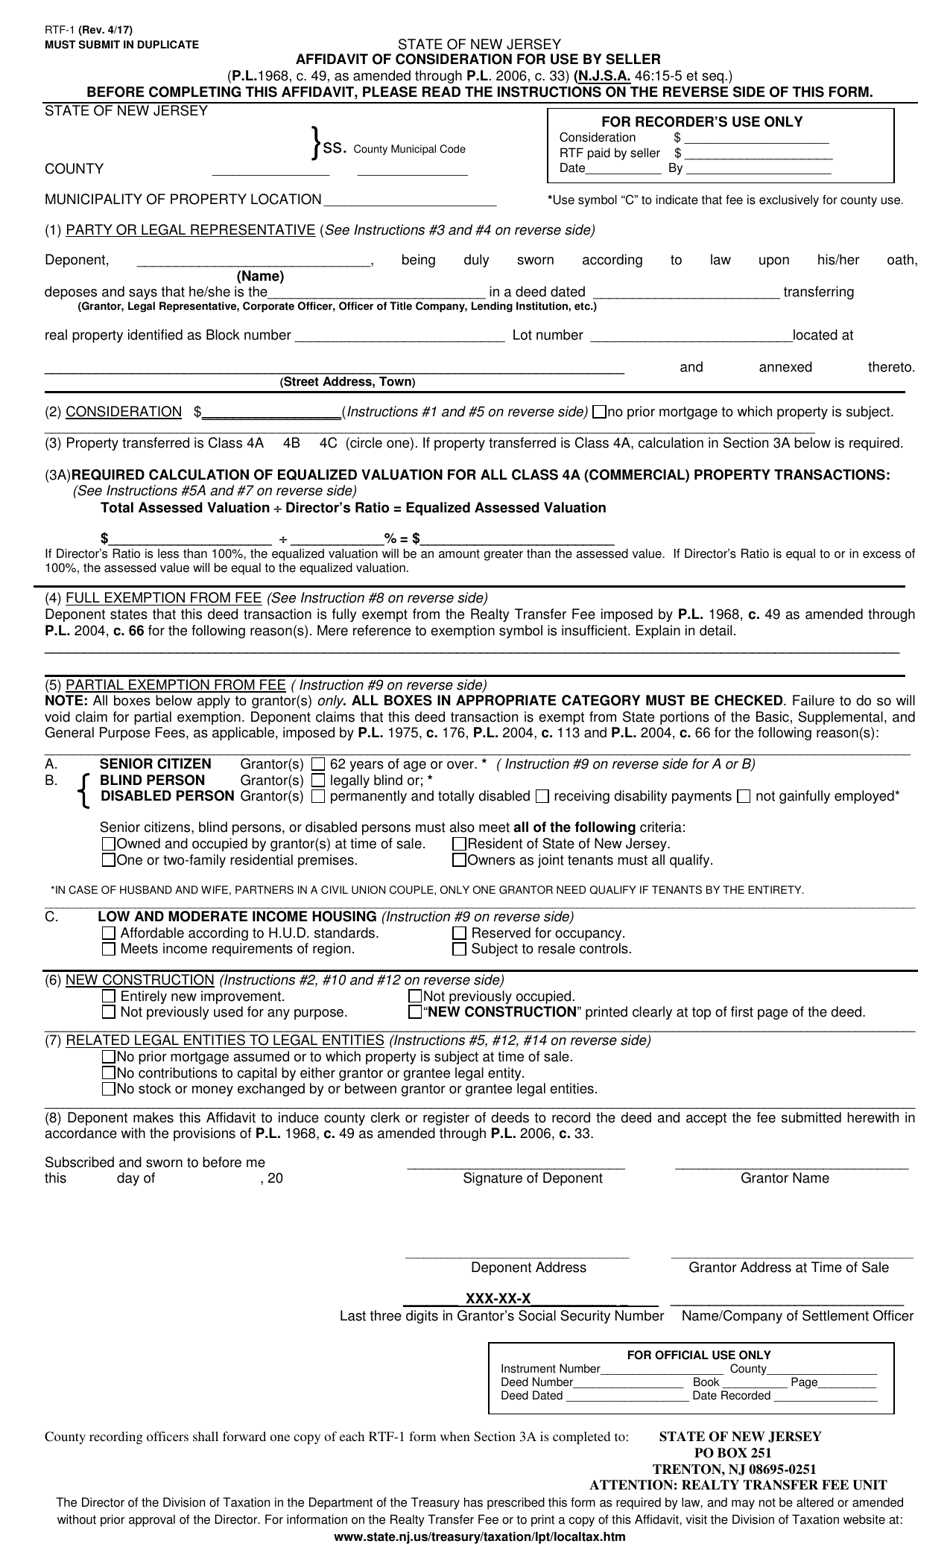 Form RTF-1 Affidavit of Consideration for Use by Seller - New Jersey, Page 1